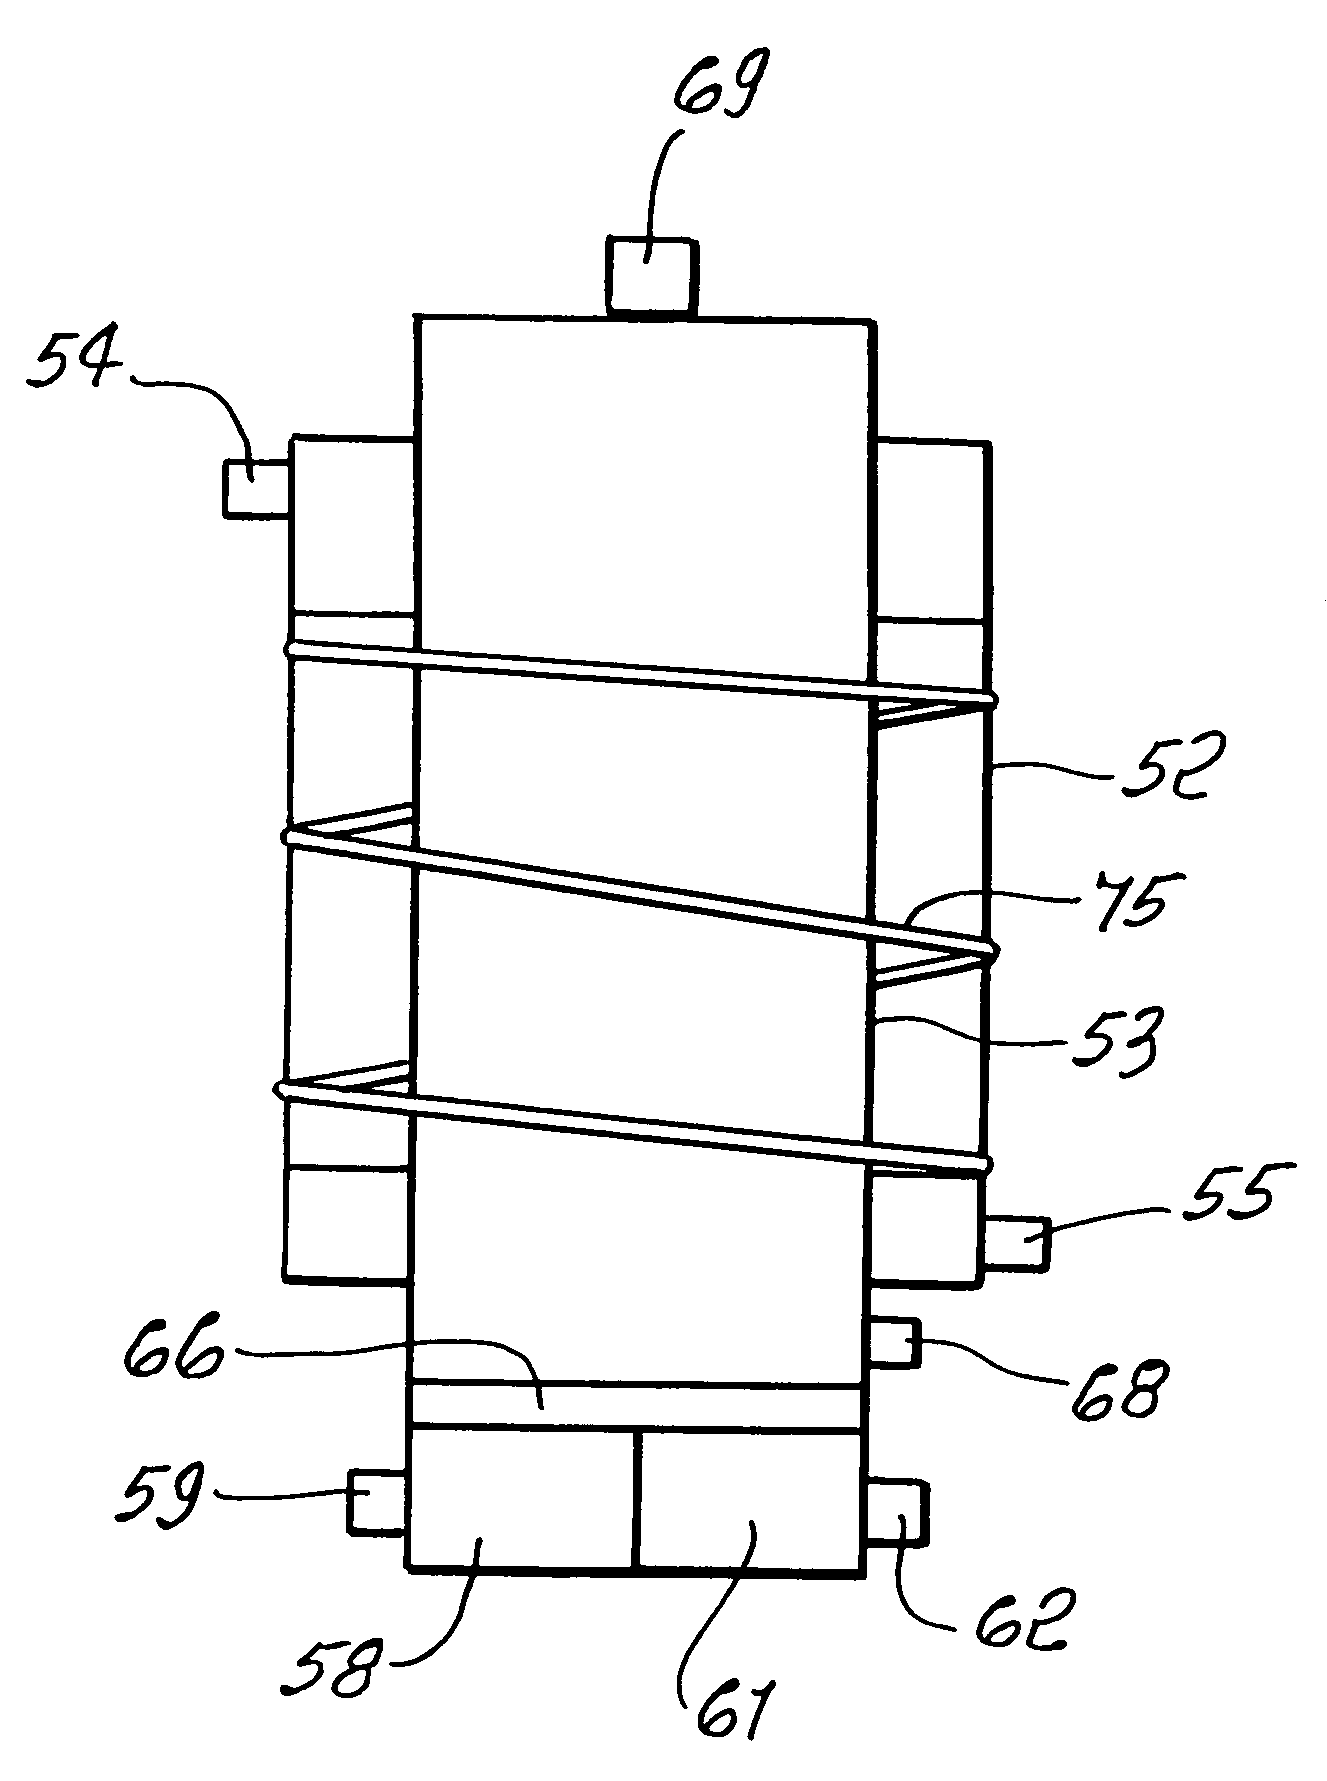 Thermally-integrated low temperature water-gas shift reactor apparatus and process